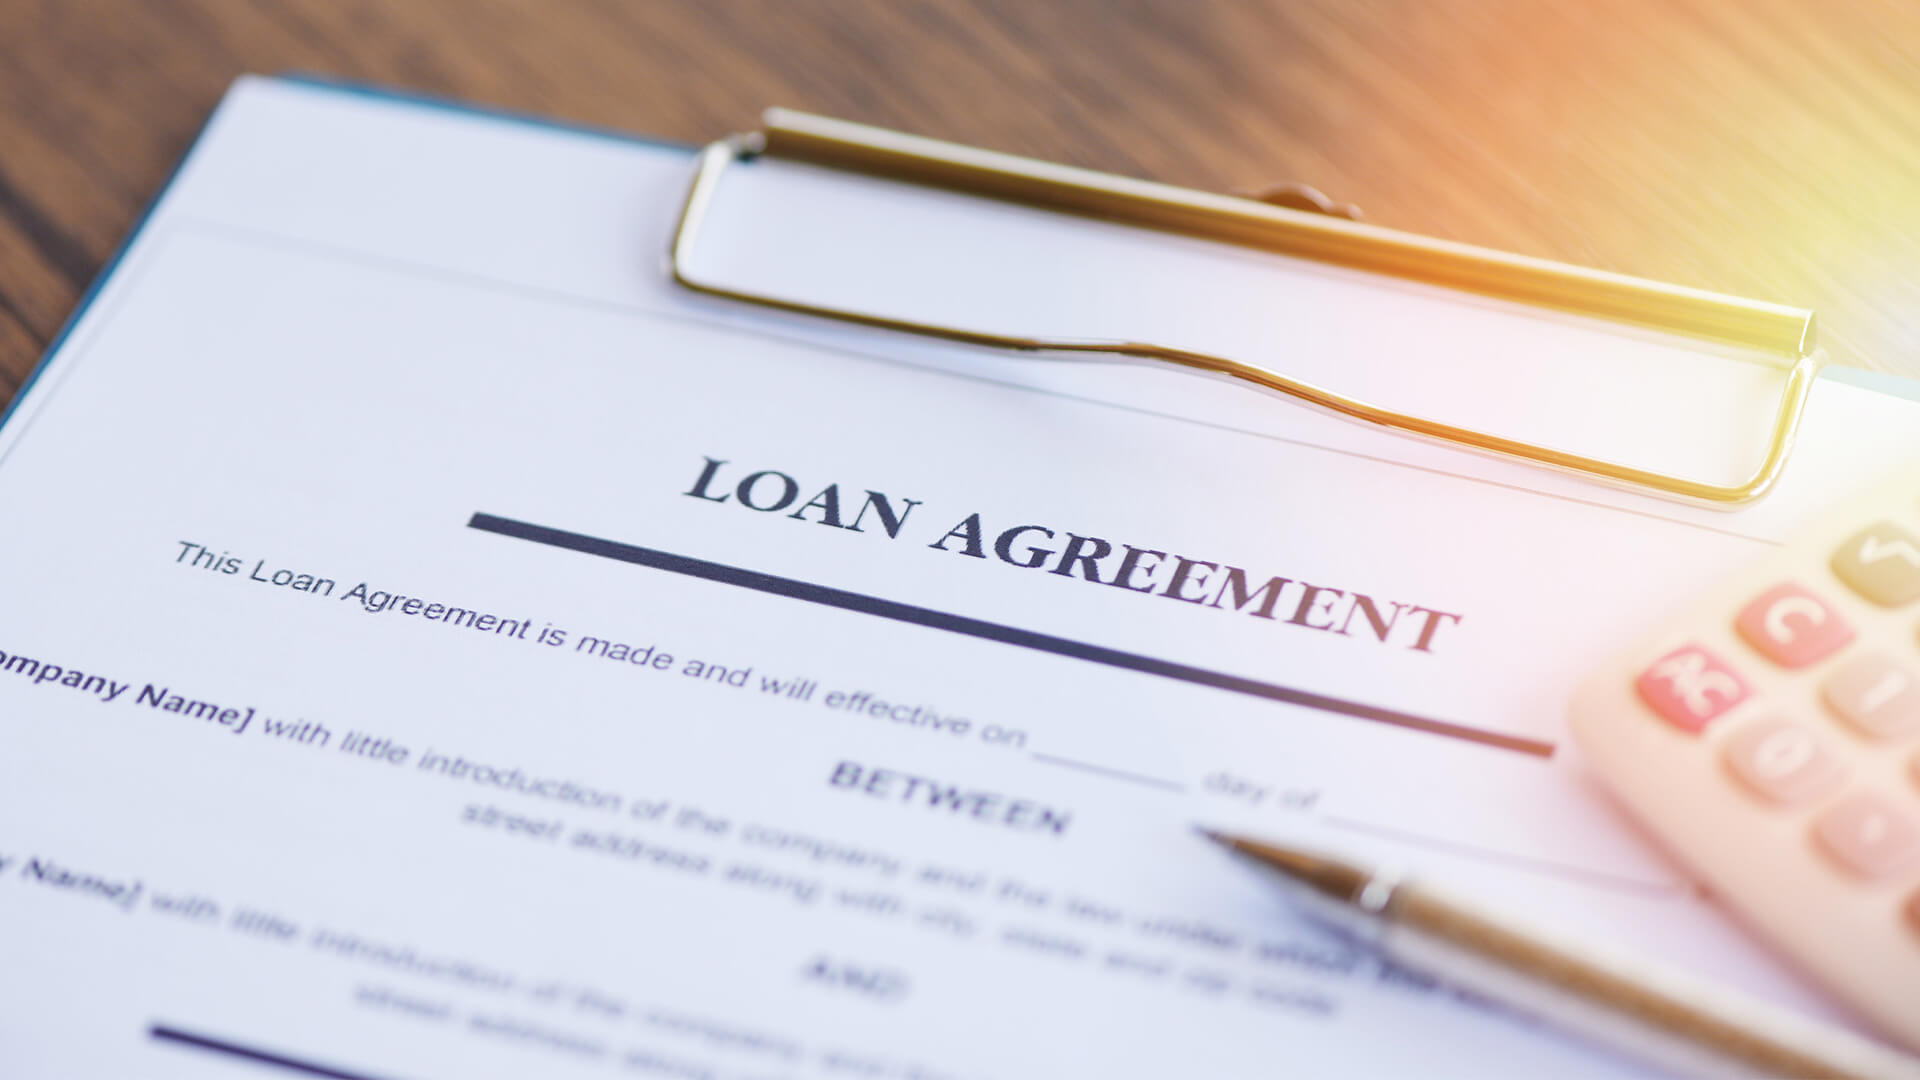 format for loan agreement